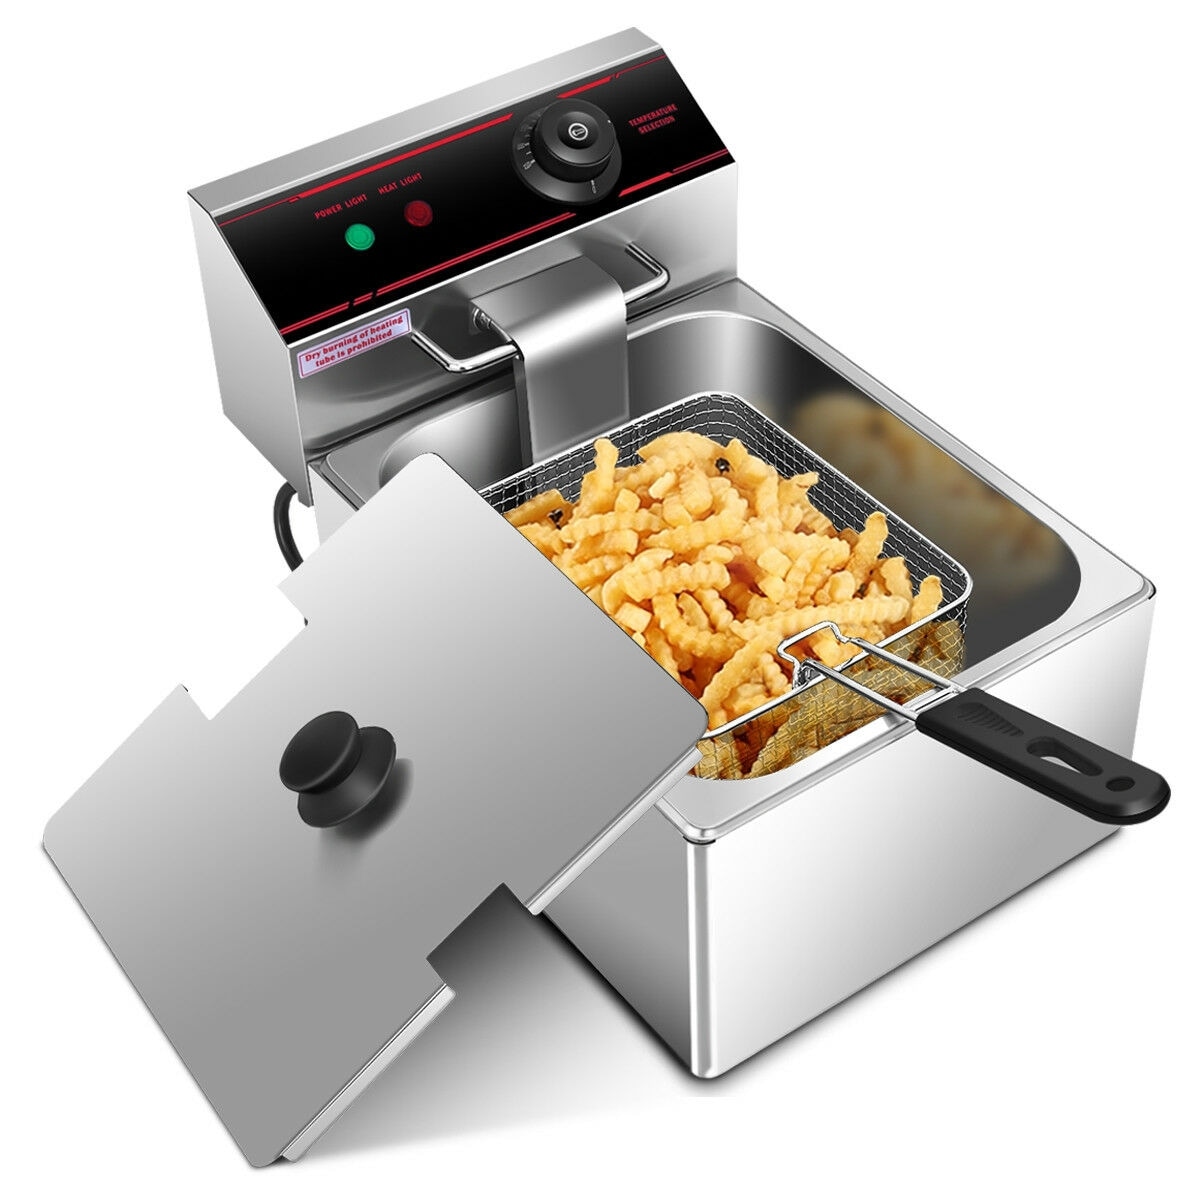 https://ak1.ostkcdn.com/images/products/is/images/direct/872f05d1b40595c104f73b9ec5415eca4a2fd707/Gymax-1700W-Deep-Fryer-Electric-Commercial-Tabletop-Restaurant-Frying.jpg